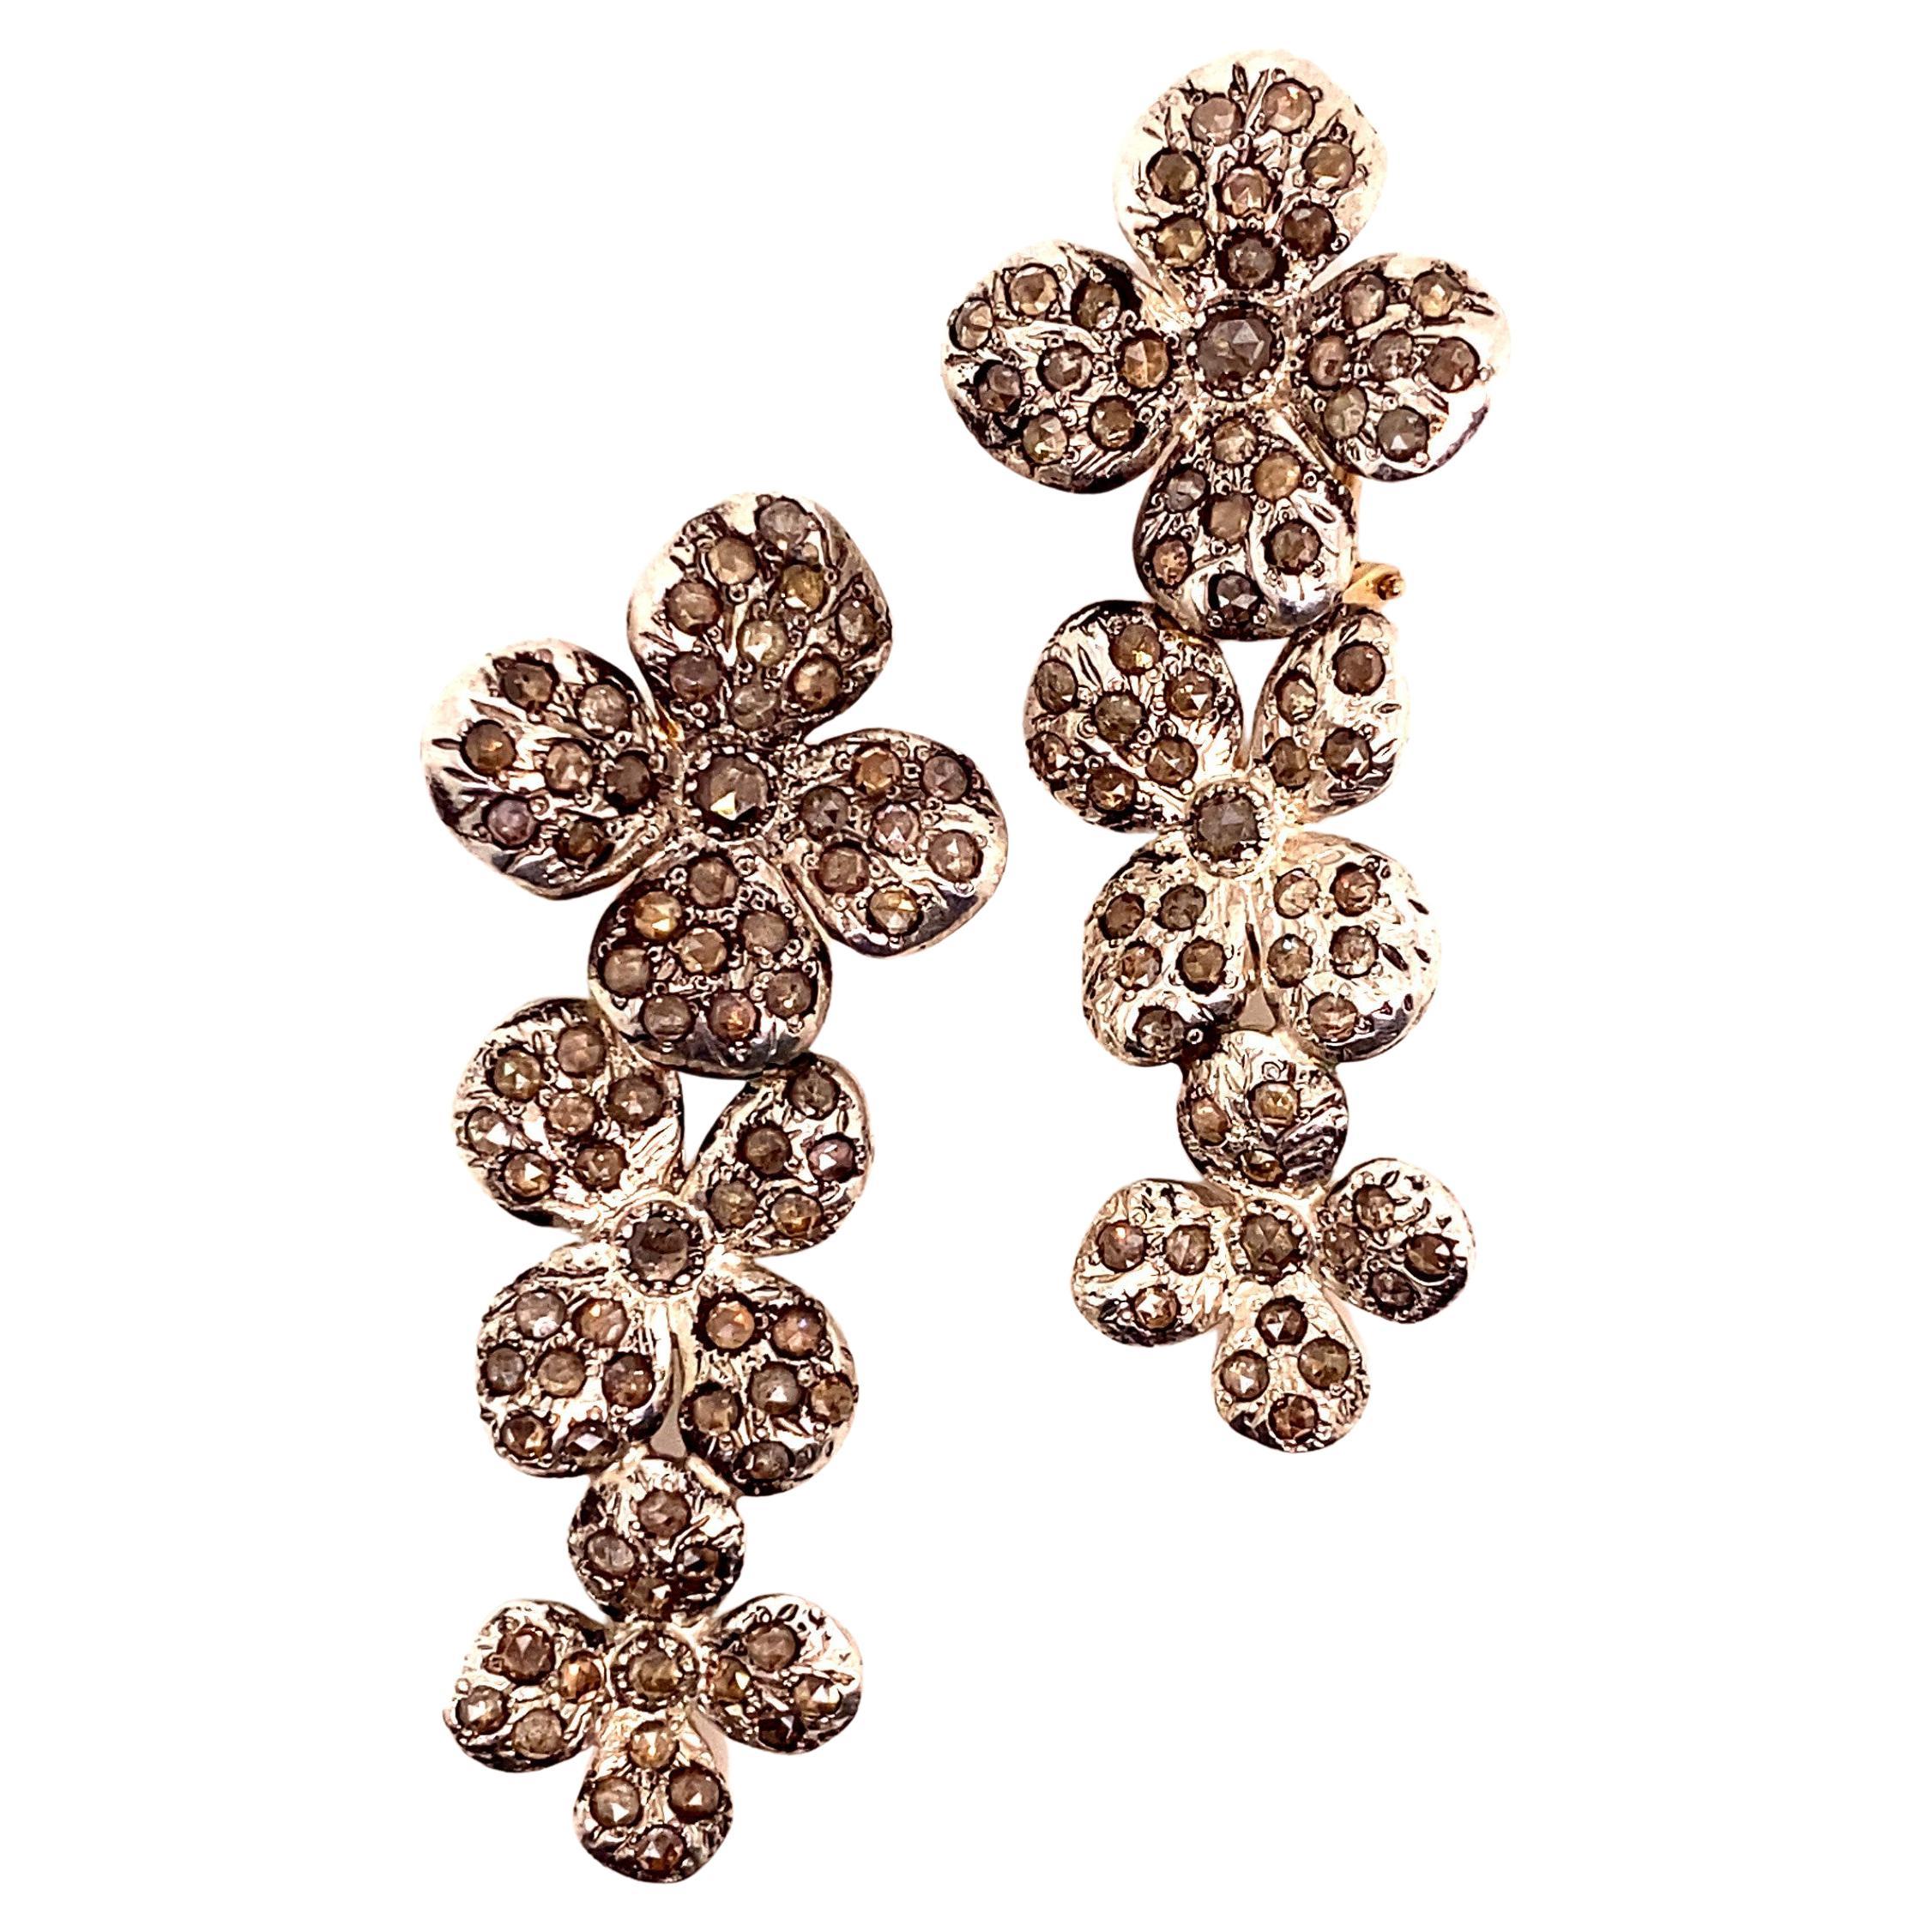 21st Century 9 Karat Rose Gold and 925 Silver Rose-Cut Diamond Earrings For Sale